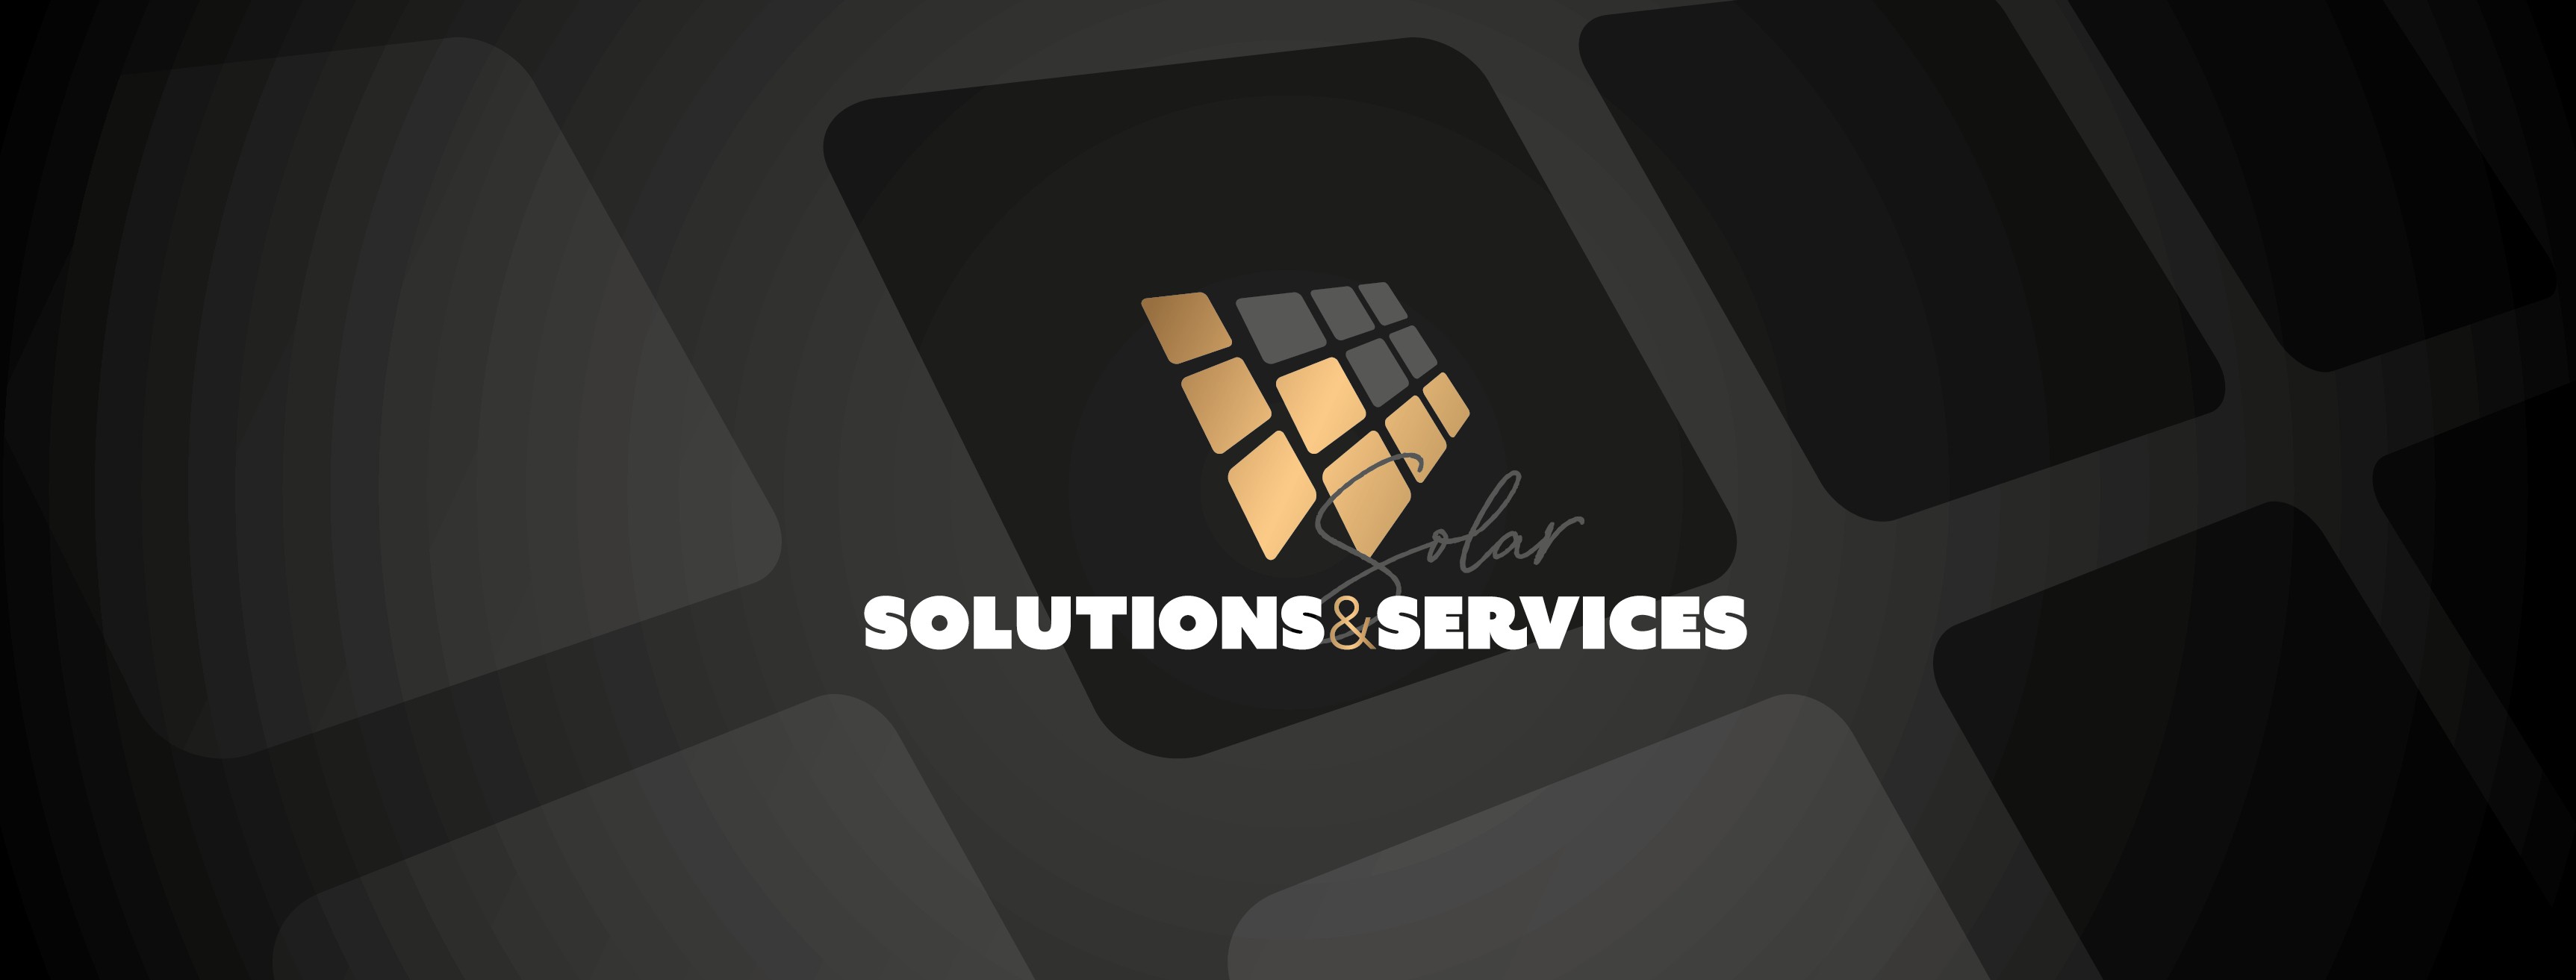 WV Solutions & Services